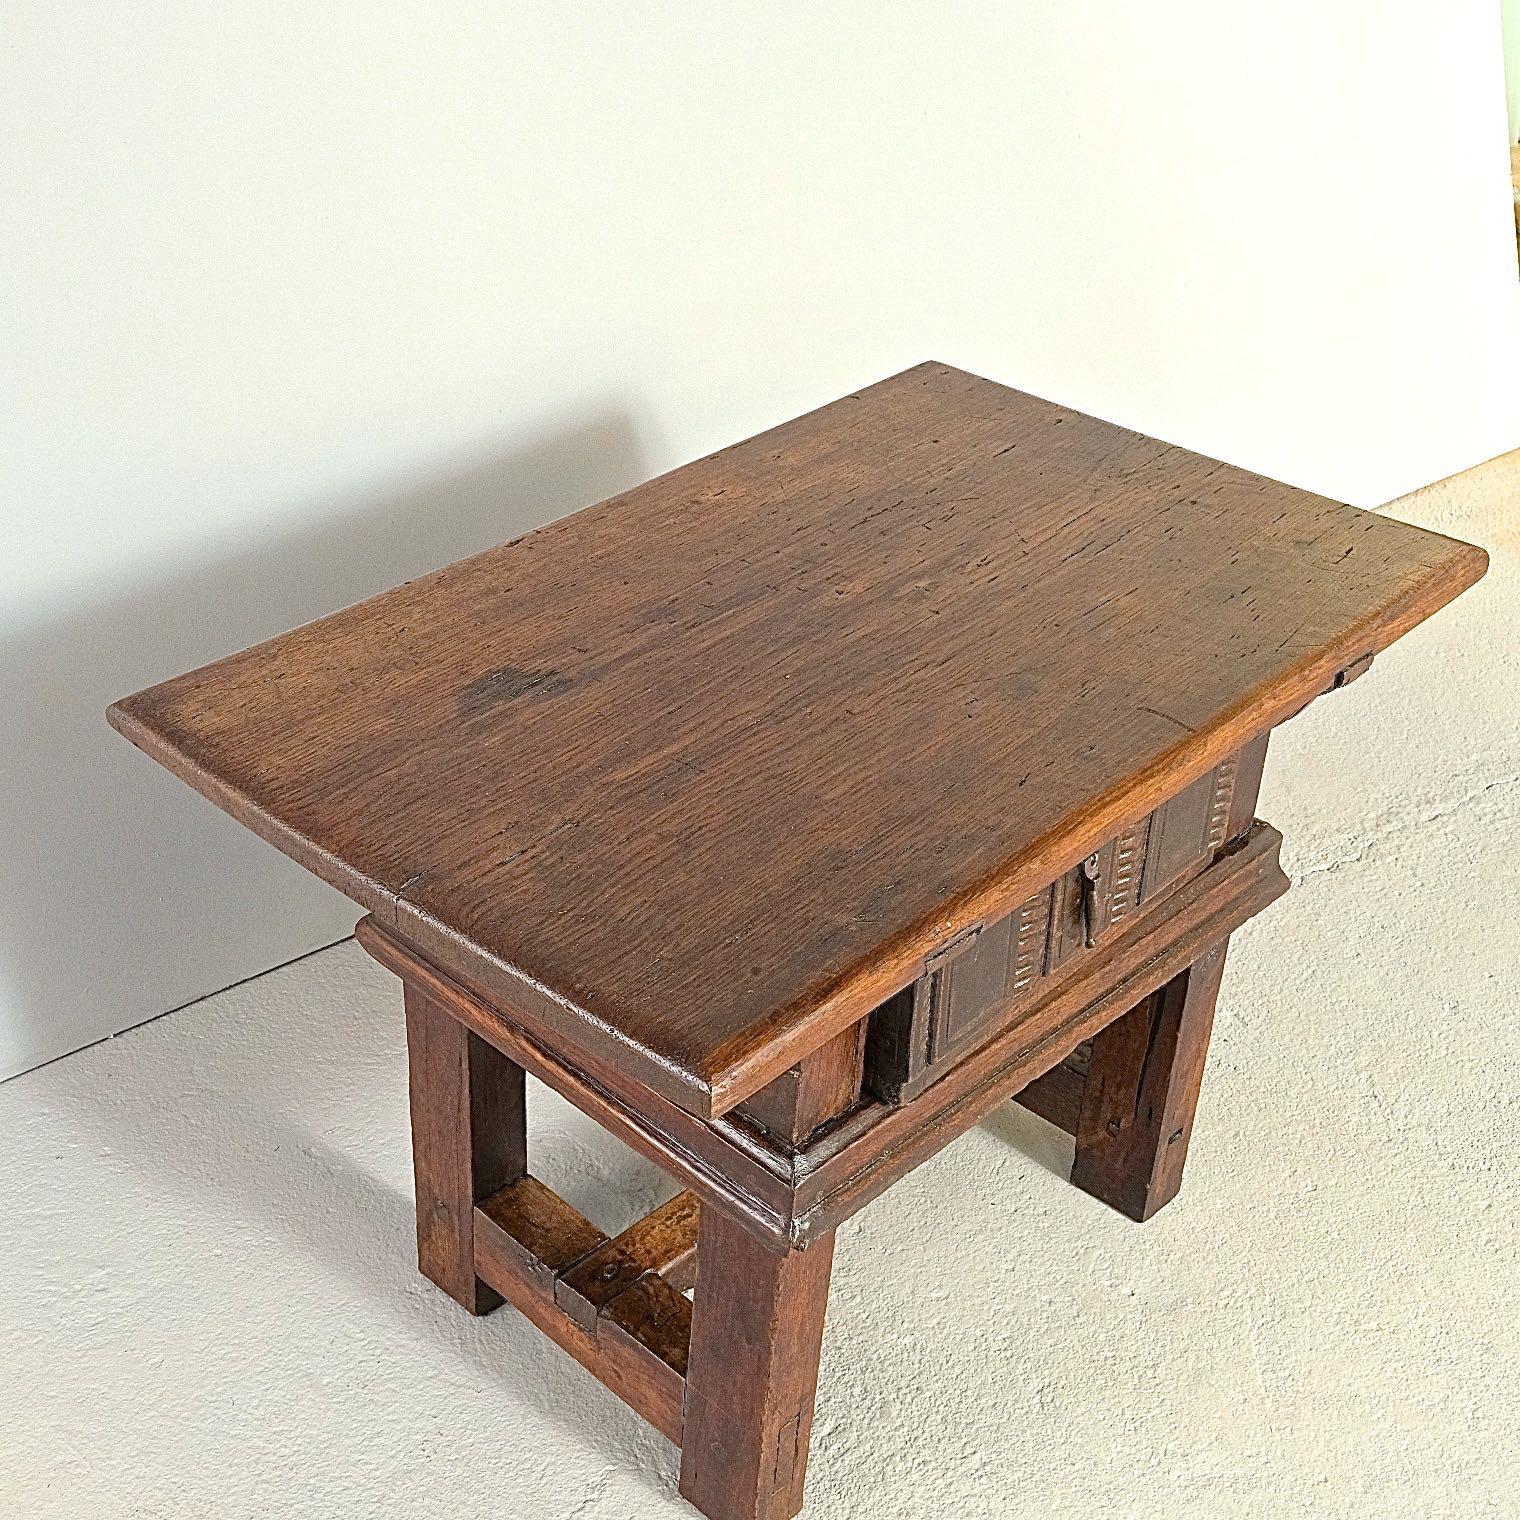 Baroque Early 18th Century Oak and Chestnut Spanish Accent Table with Drawer For Sale